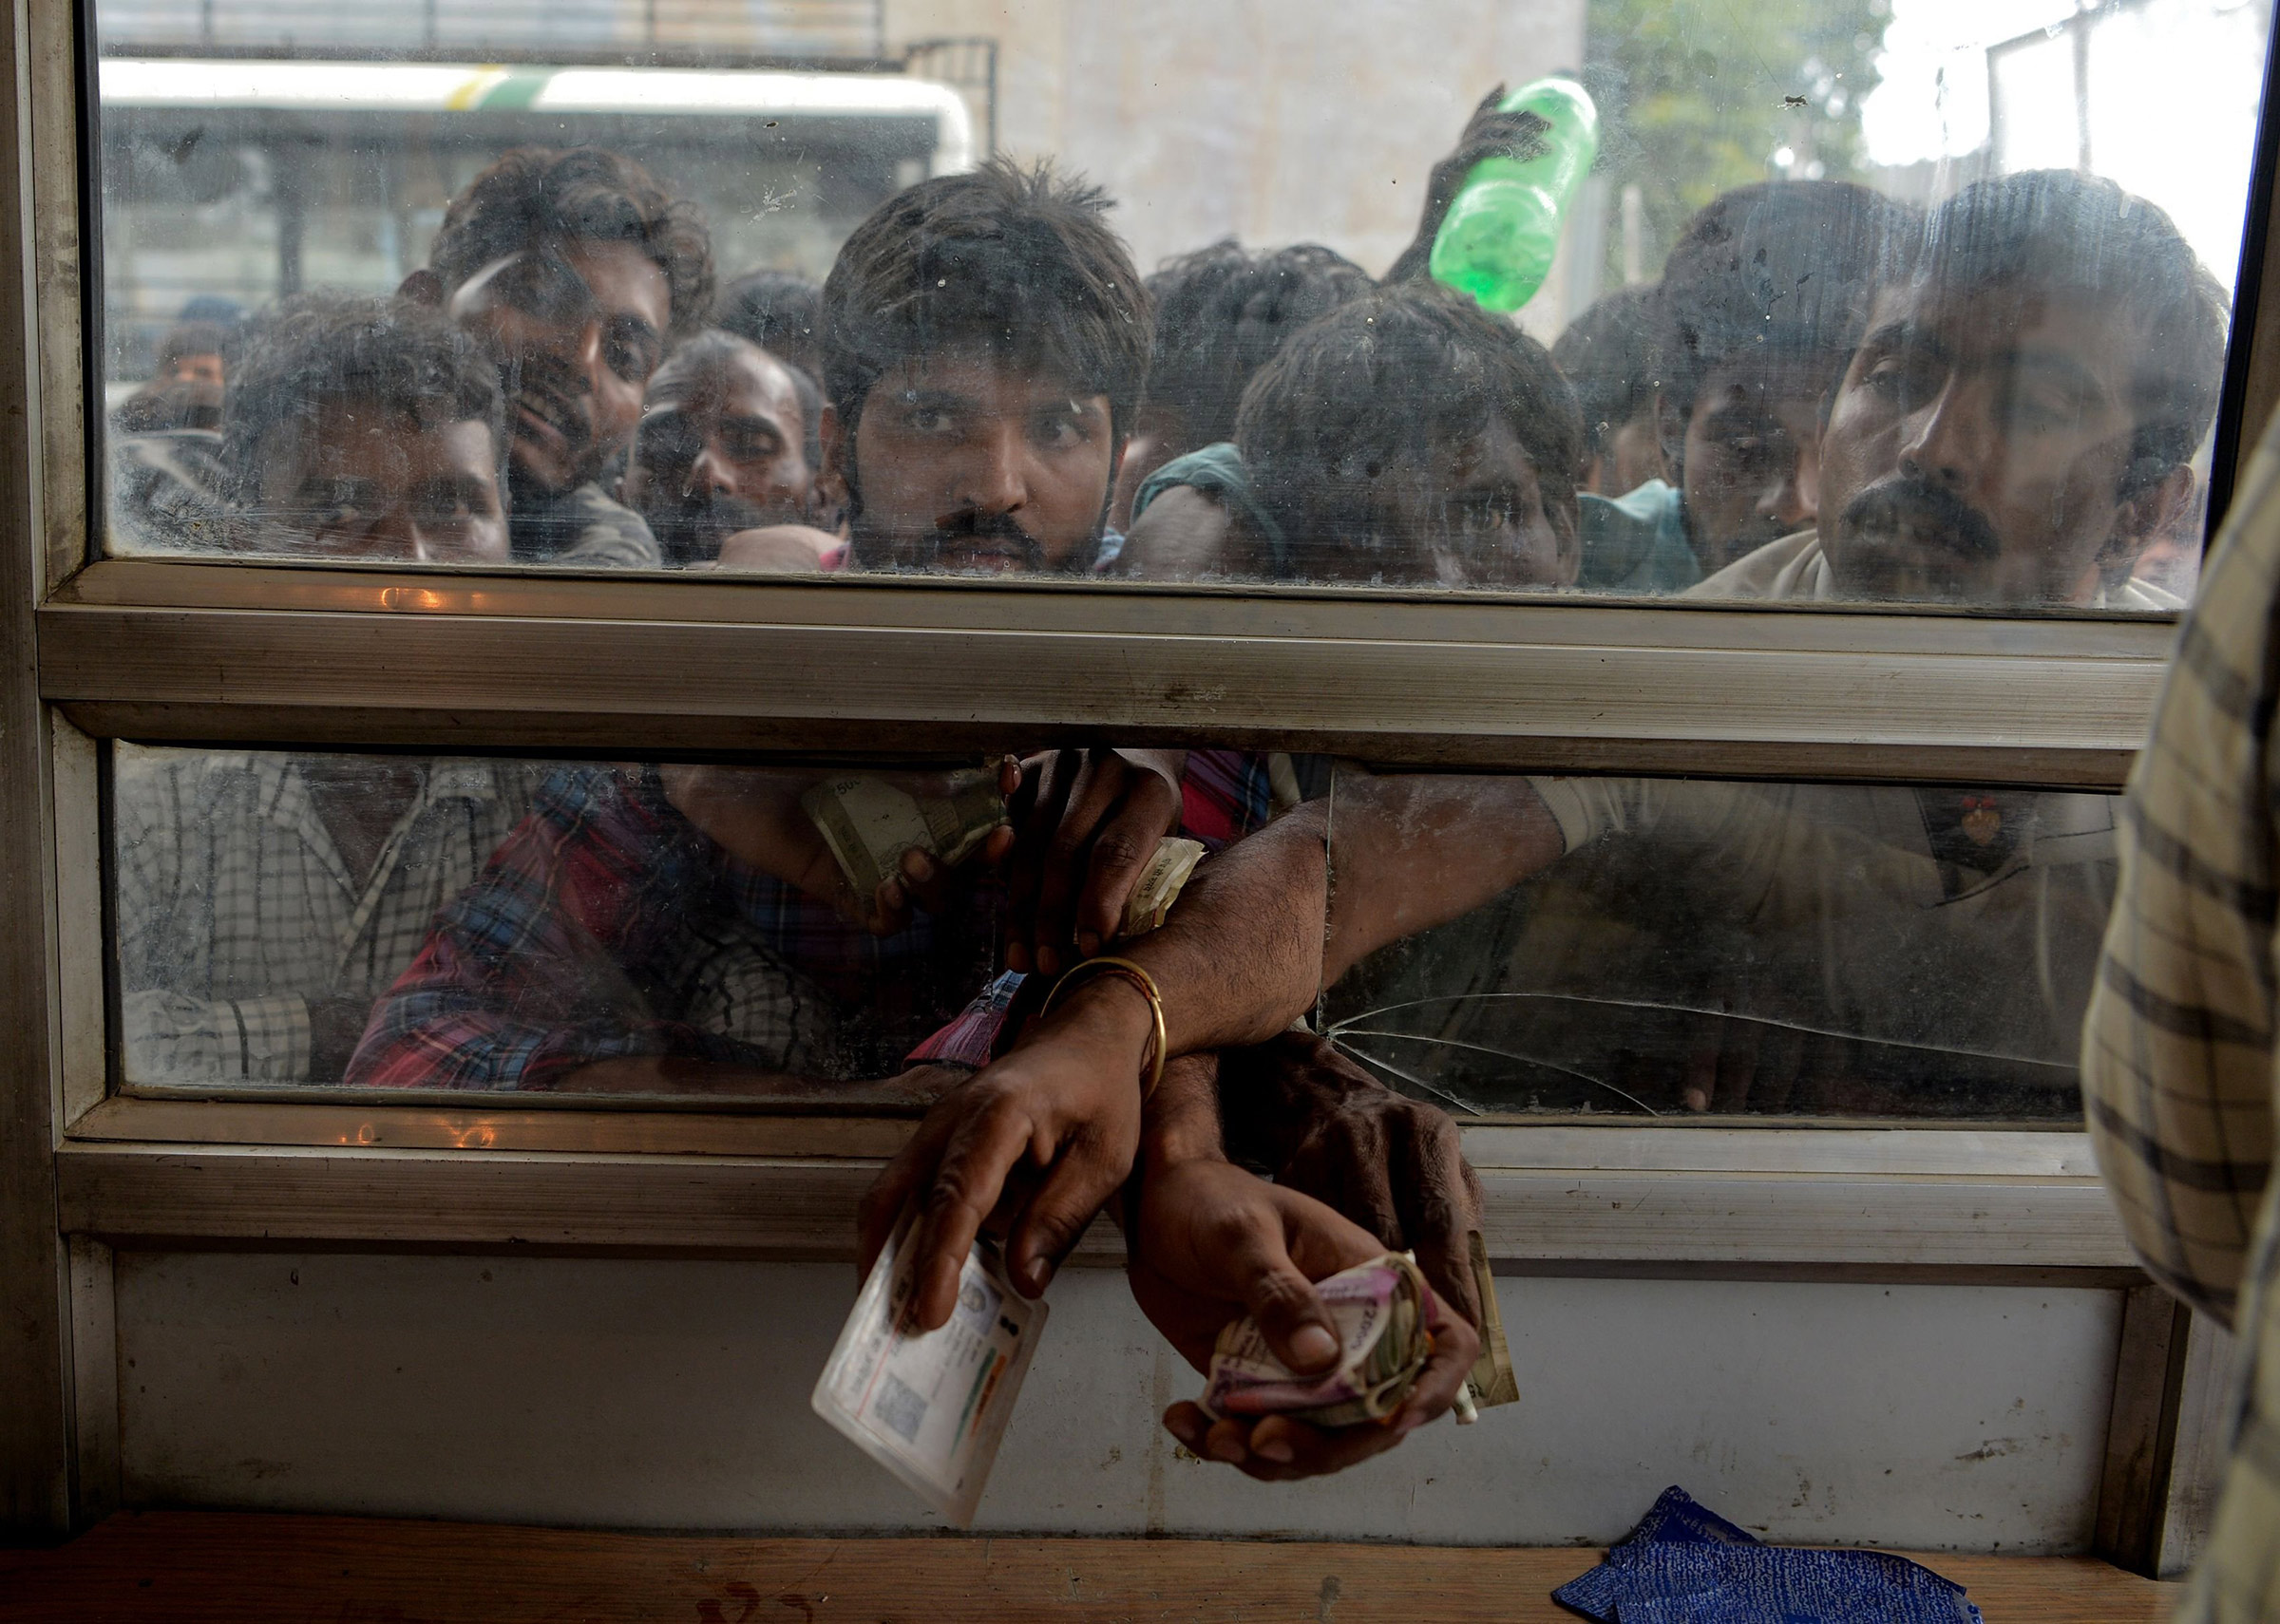 In this photo taken on August 7, 2019, labourers buy bus tickets at a counter of Jammu and Kashmir Tourist Reception Centre (JKTRC) in Srinagar. - A protester died after being chased by police during a curfew in Kashmir's main city, left in turmoil by an Indian government move to tighten control over the restive region, a police official said on August 7.